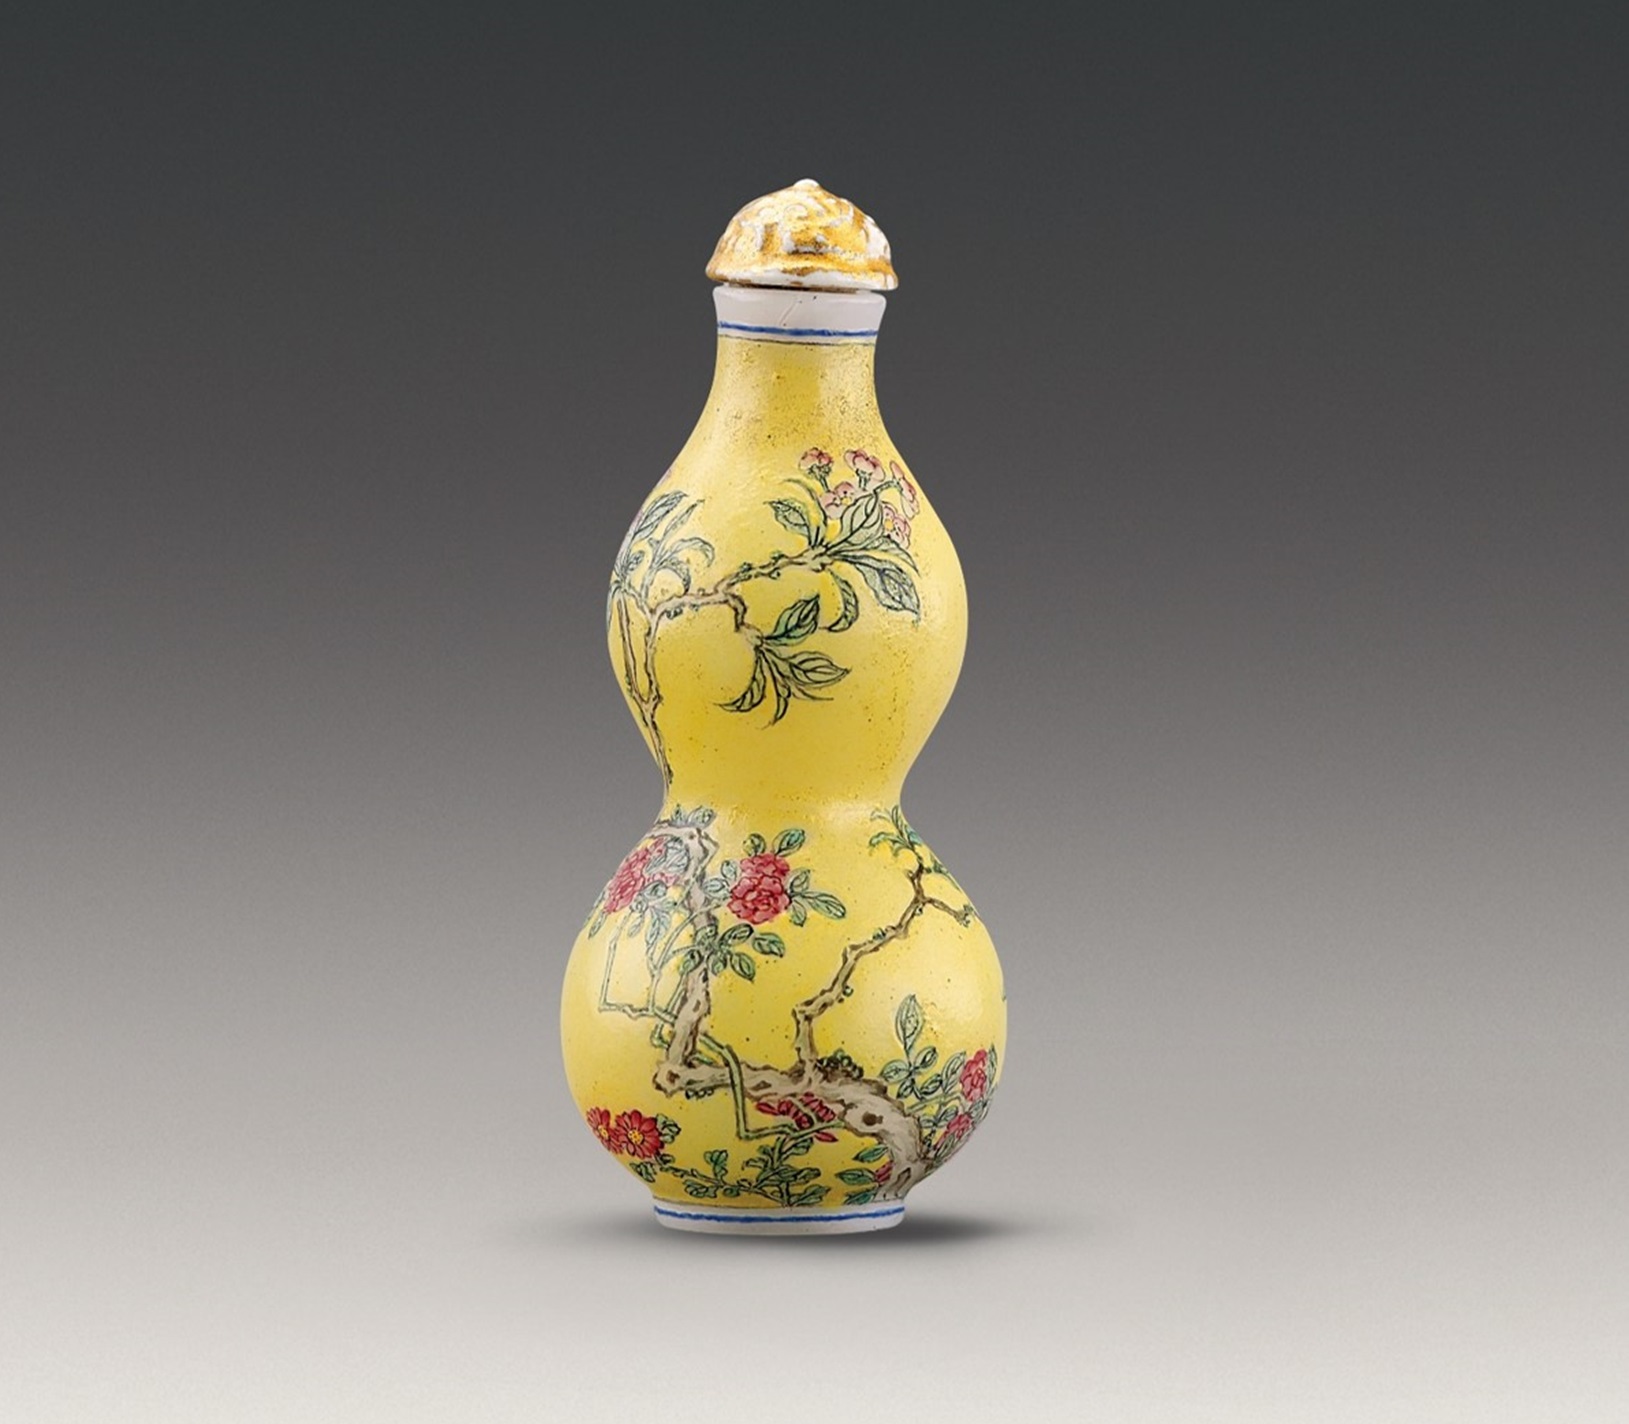 Double-gourd-shaped glass snuff bottle with floral design in painted enamels on yellow ground